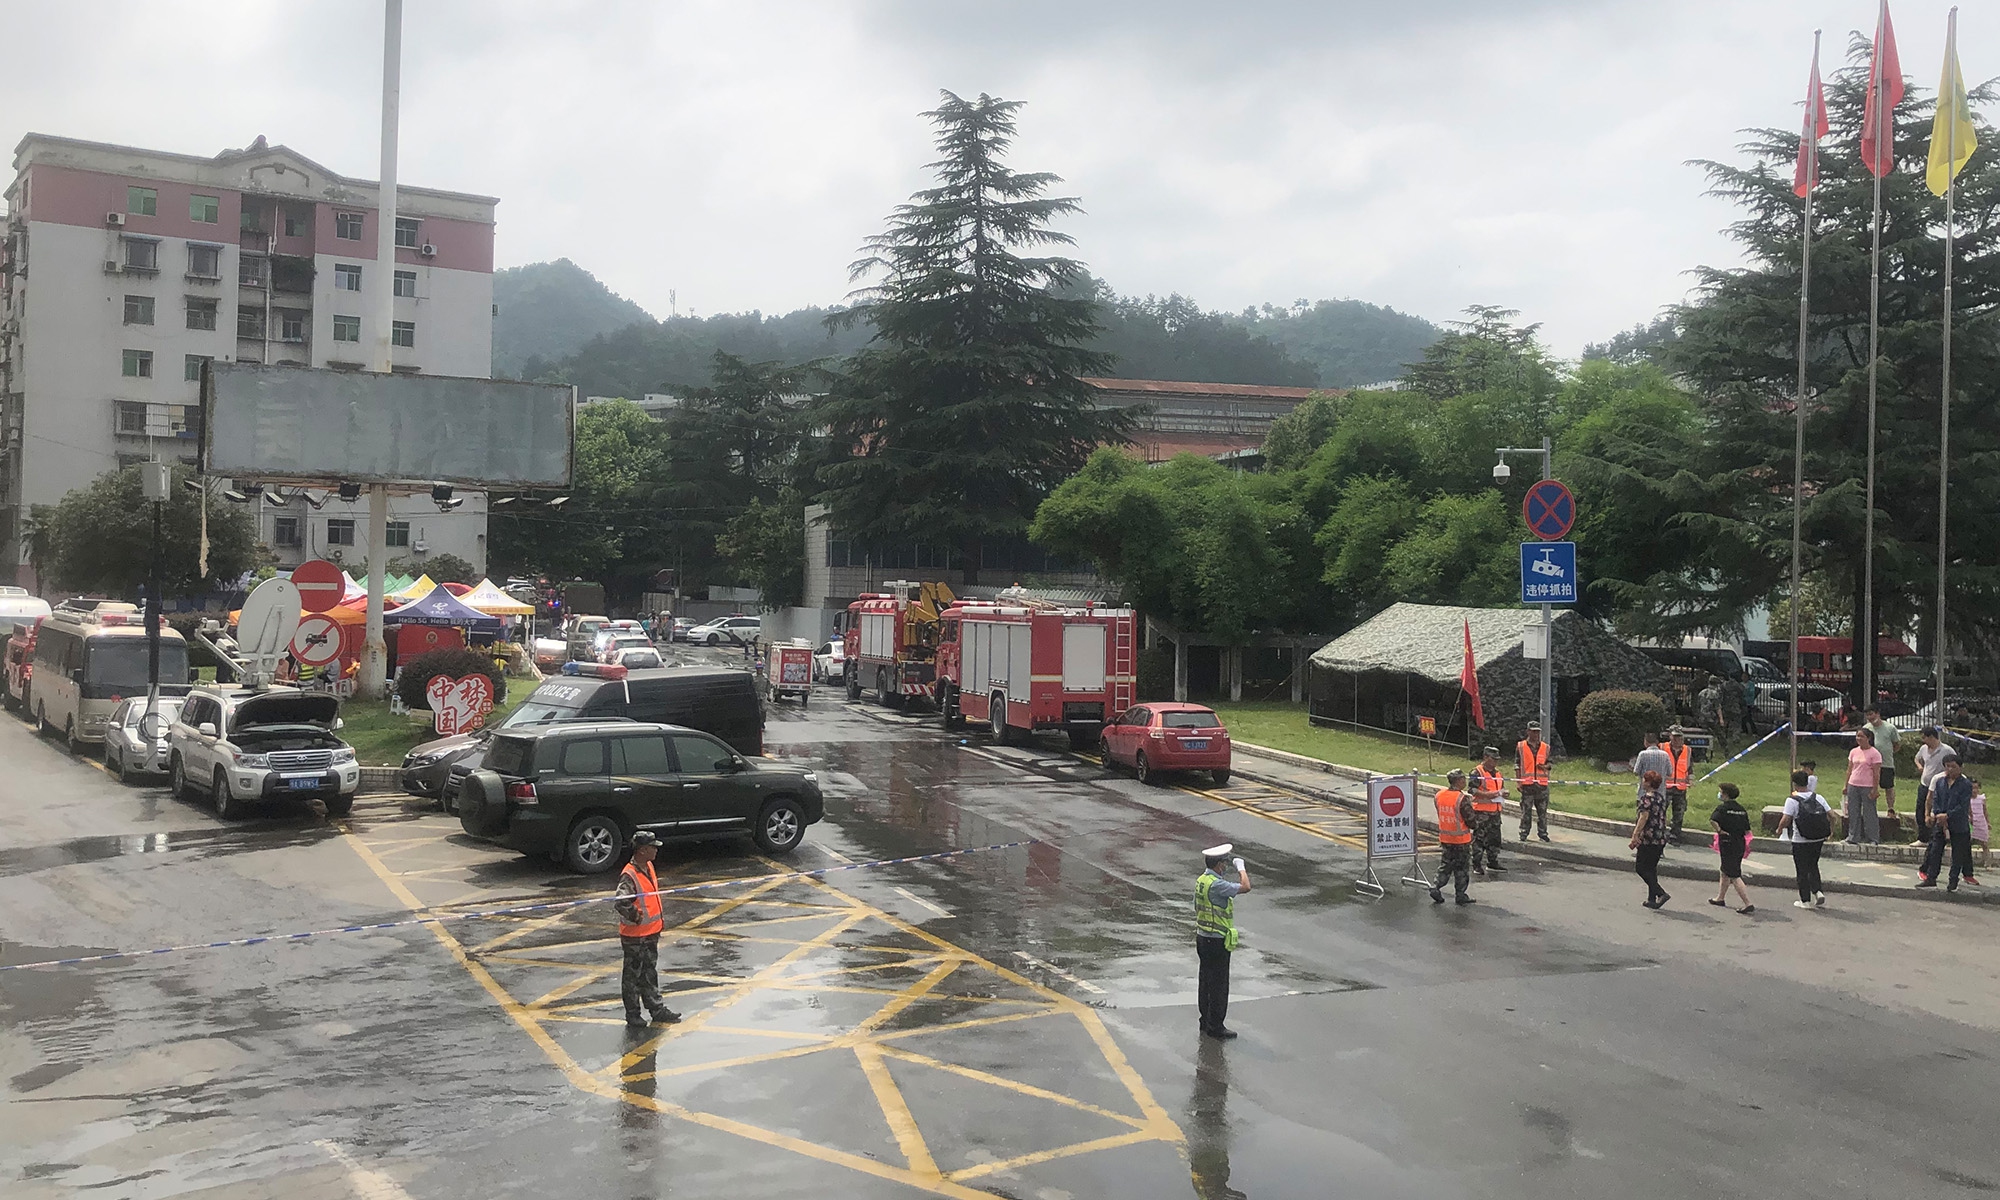 Photo taken near the site of a natural gas explosion that occurred at a market in Shiyan, Central China’s Hubei Province on Sunday morning. Photo:Leng Shumei/GT